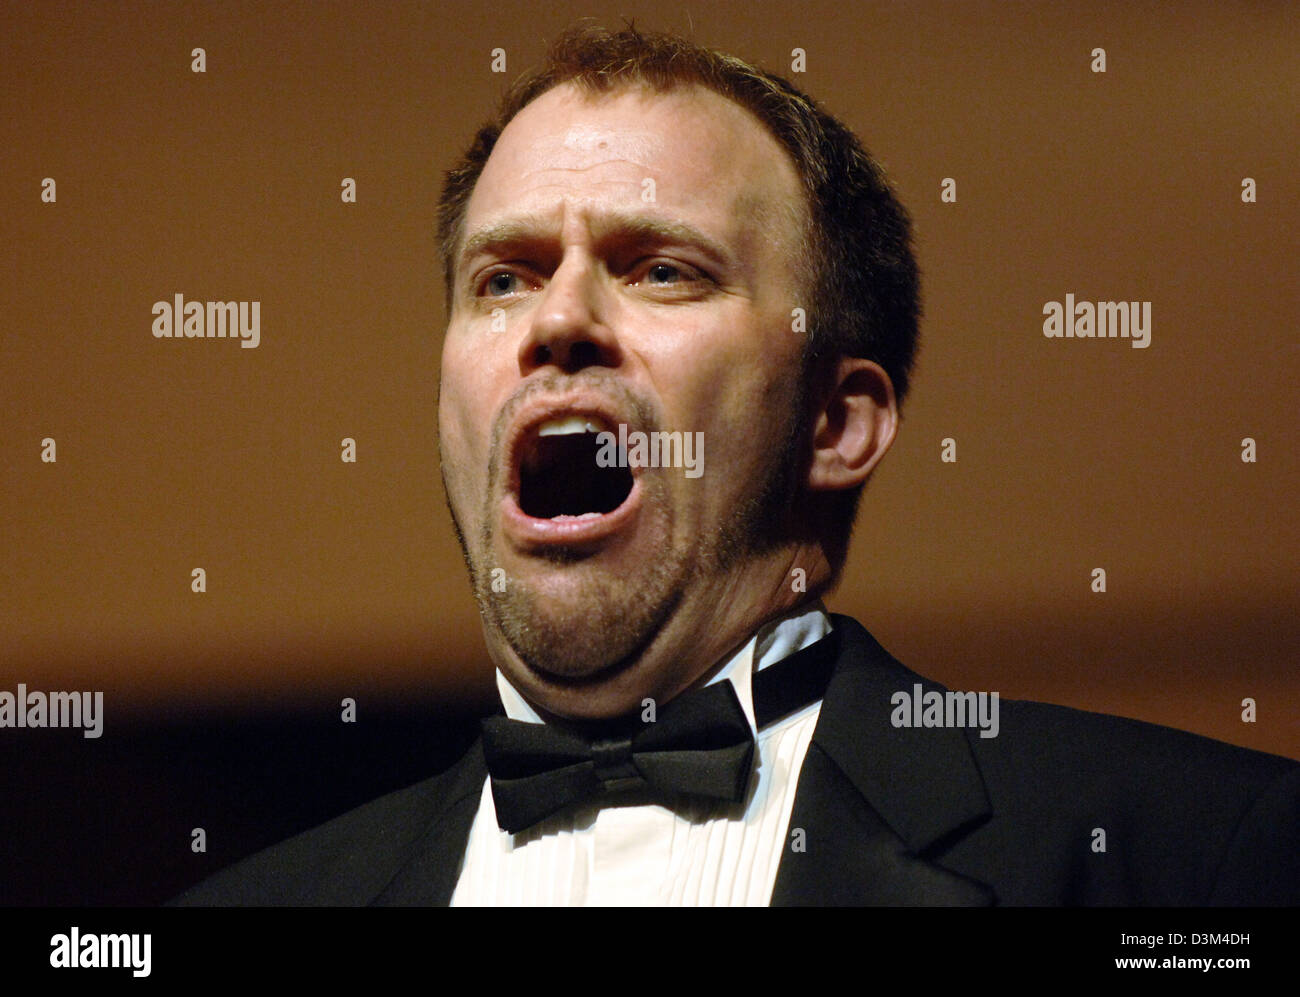 (dpa) - The picture shows American opera singer Thomas Cooley performing during the celebration of the 140th anniversary of the State Theatre (Staatstheater am Gaertnerplatz) in Munich, Germany, 13 November 2005. Cooley was born in Minneapolis, Minnesota. He received his vocal training at DePauw University, University of Minnesota, USA and the Richard Strauss academy of music in Mu Stock Photo